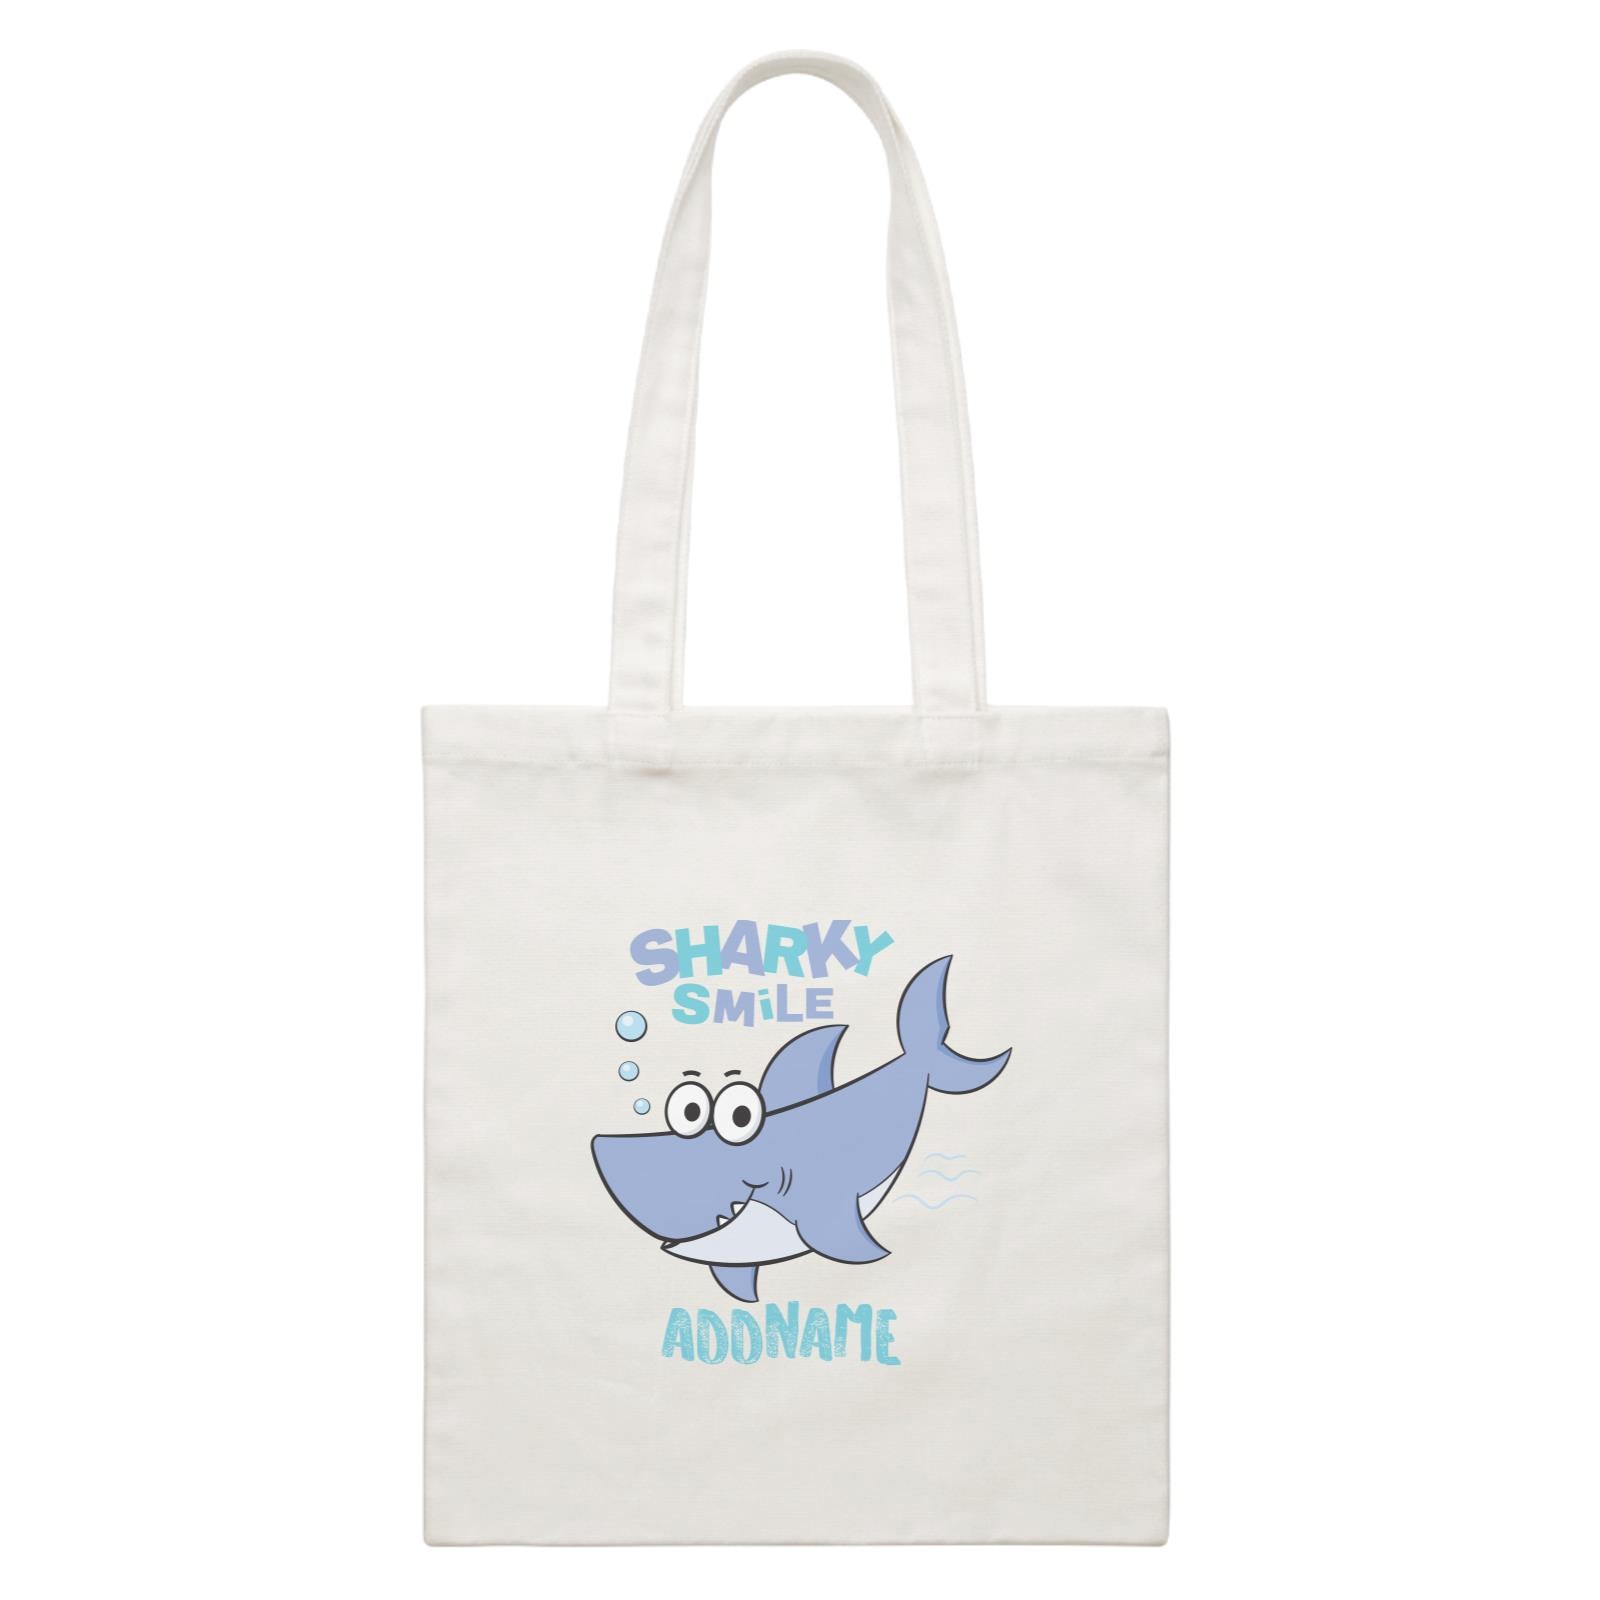 Cool Cute Sea Animals Sharky Smile Addname White Canvas Bag